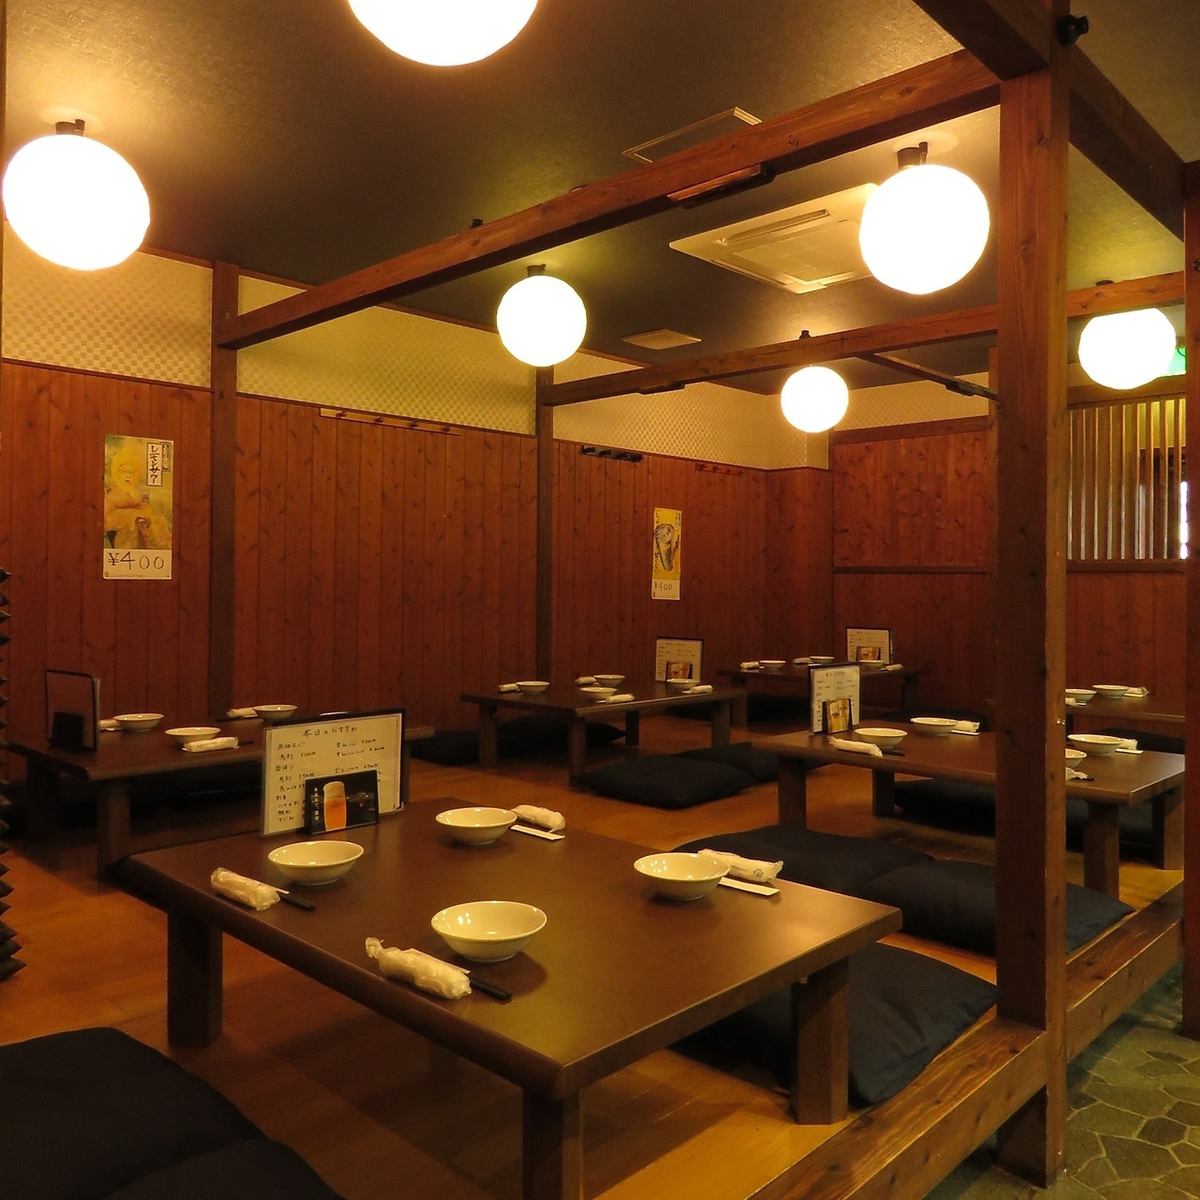 Courses start at 4,000 yen and come with all-you-can-drink for 2 hours. Reservations are also available upon consultation for parties of 20 or more.